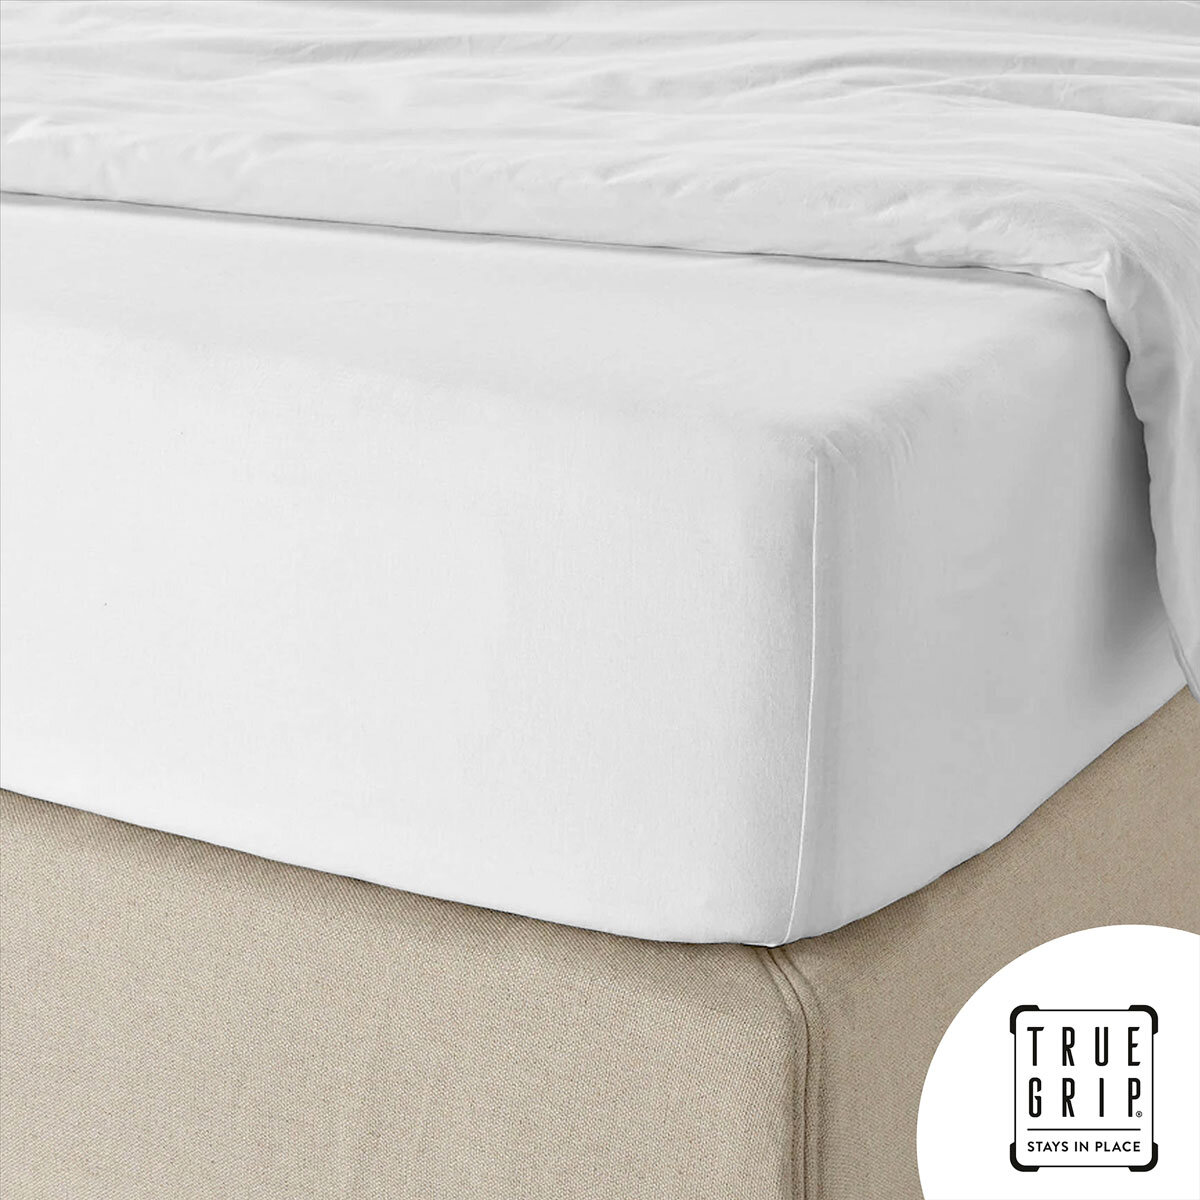 Purity Home Easy-care 400 Thread Count Cotton Fitted Sheet